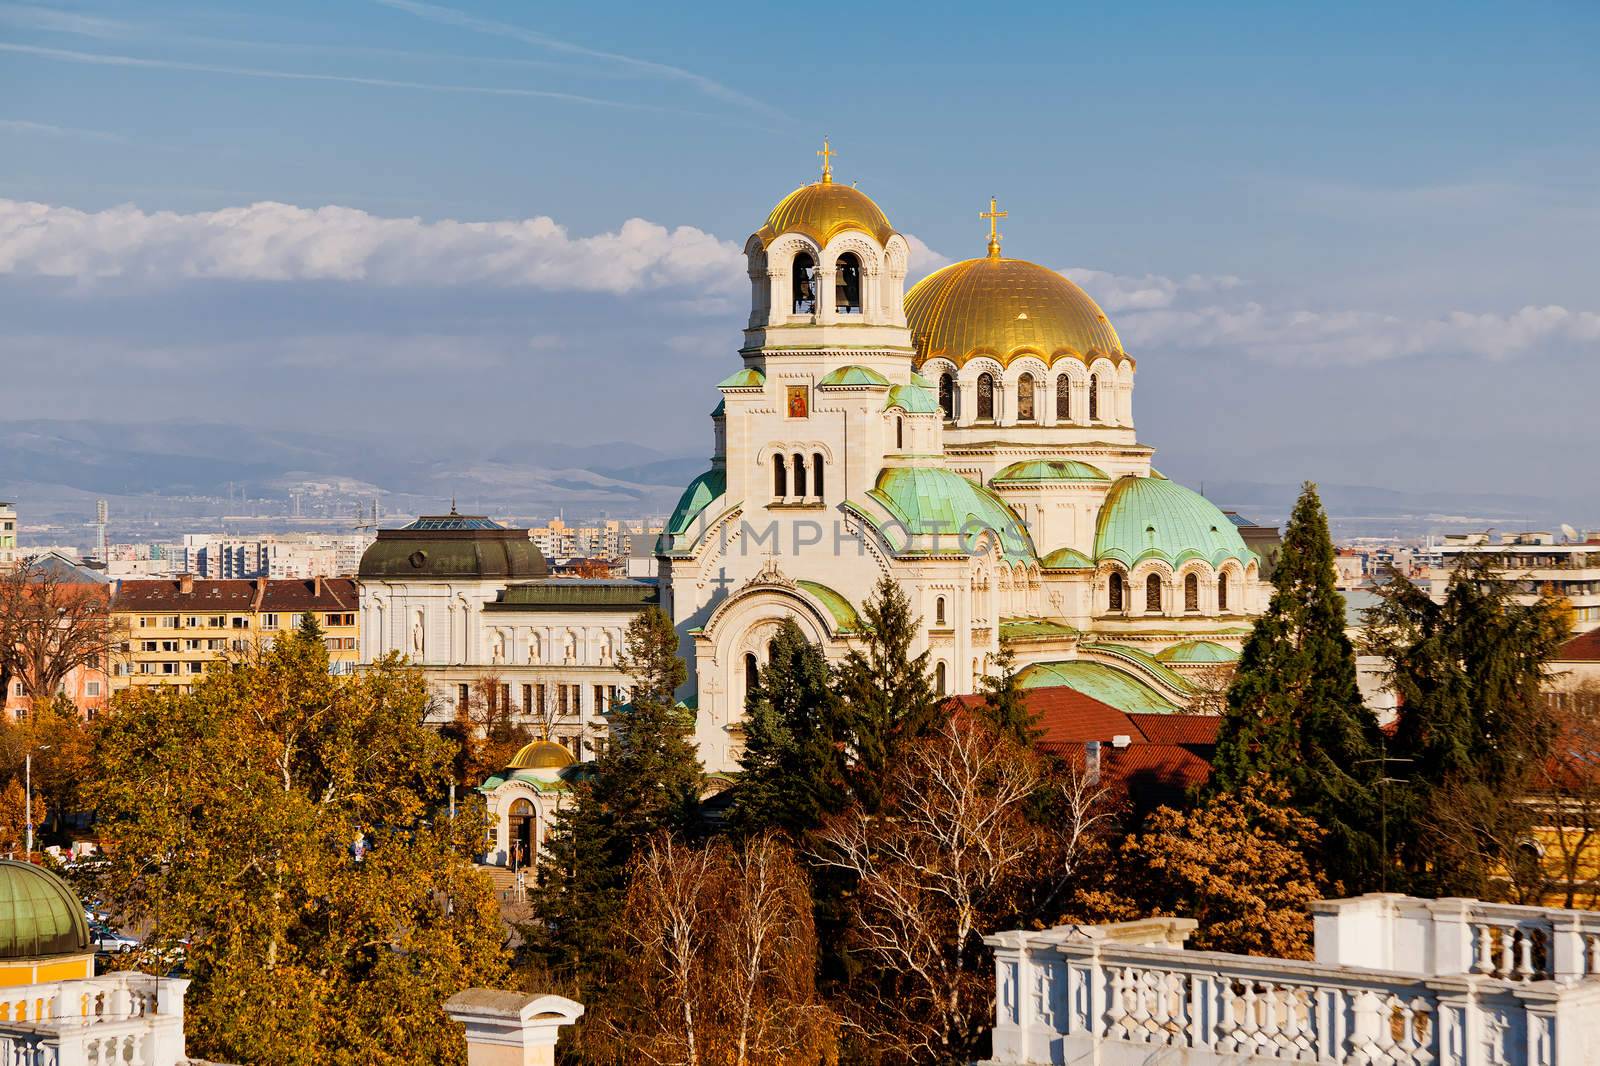 A view of golden domes st. Aleksander Nevski cathedral and downtown Sofia, Bulgaria